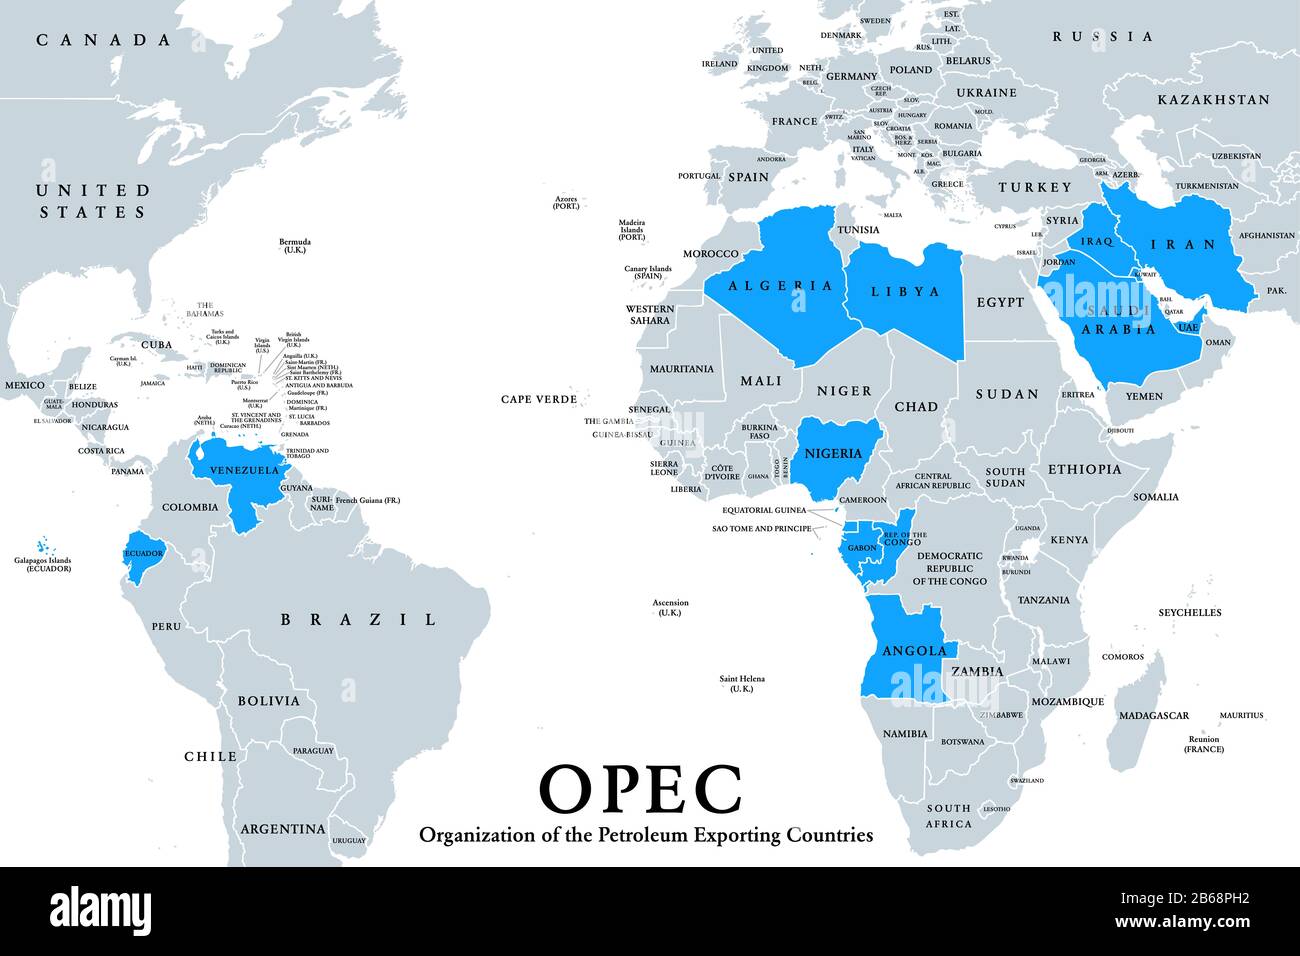 OPEC member states, political map, English labeling. Organization of the Petroleum Exporting Countries, organization of 14 nations. Stock Photo